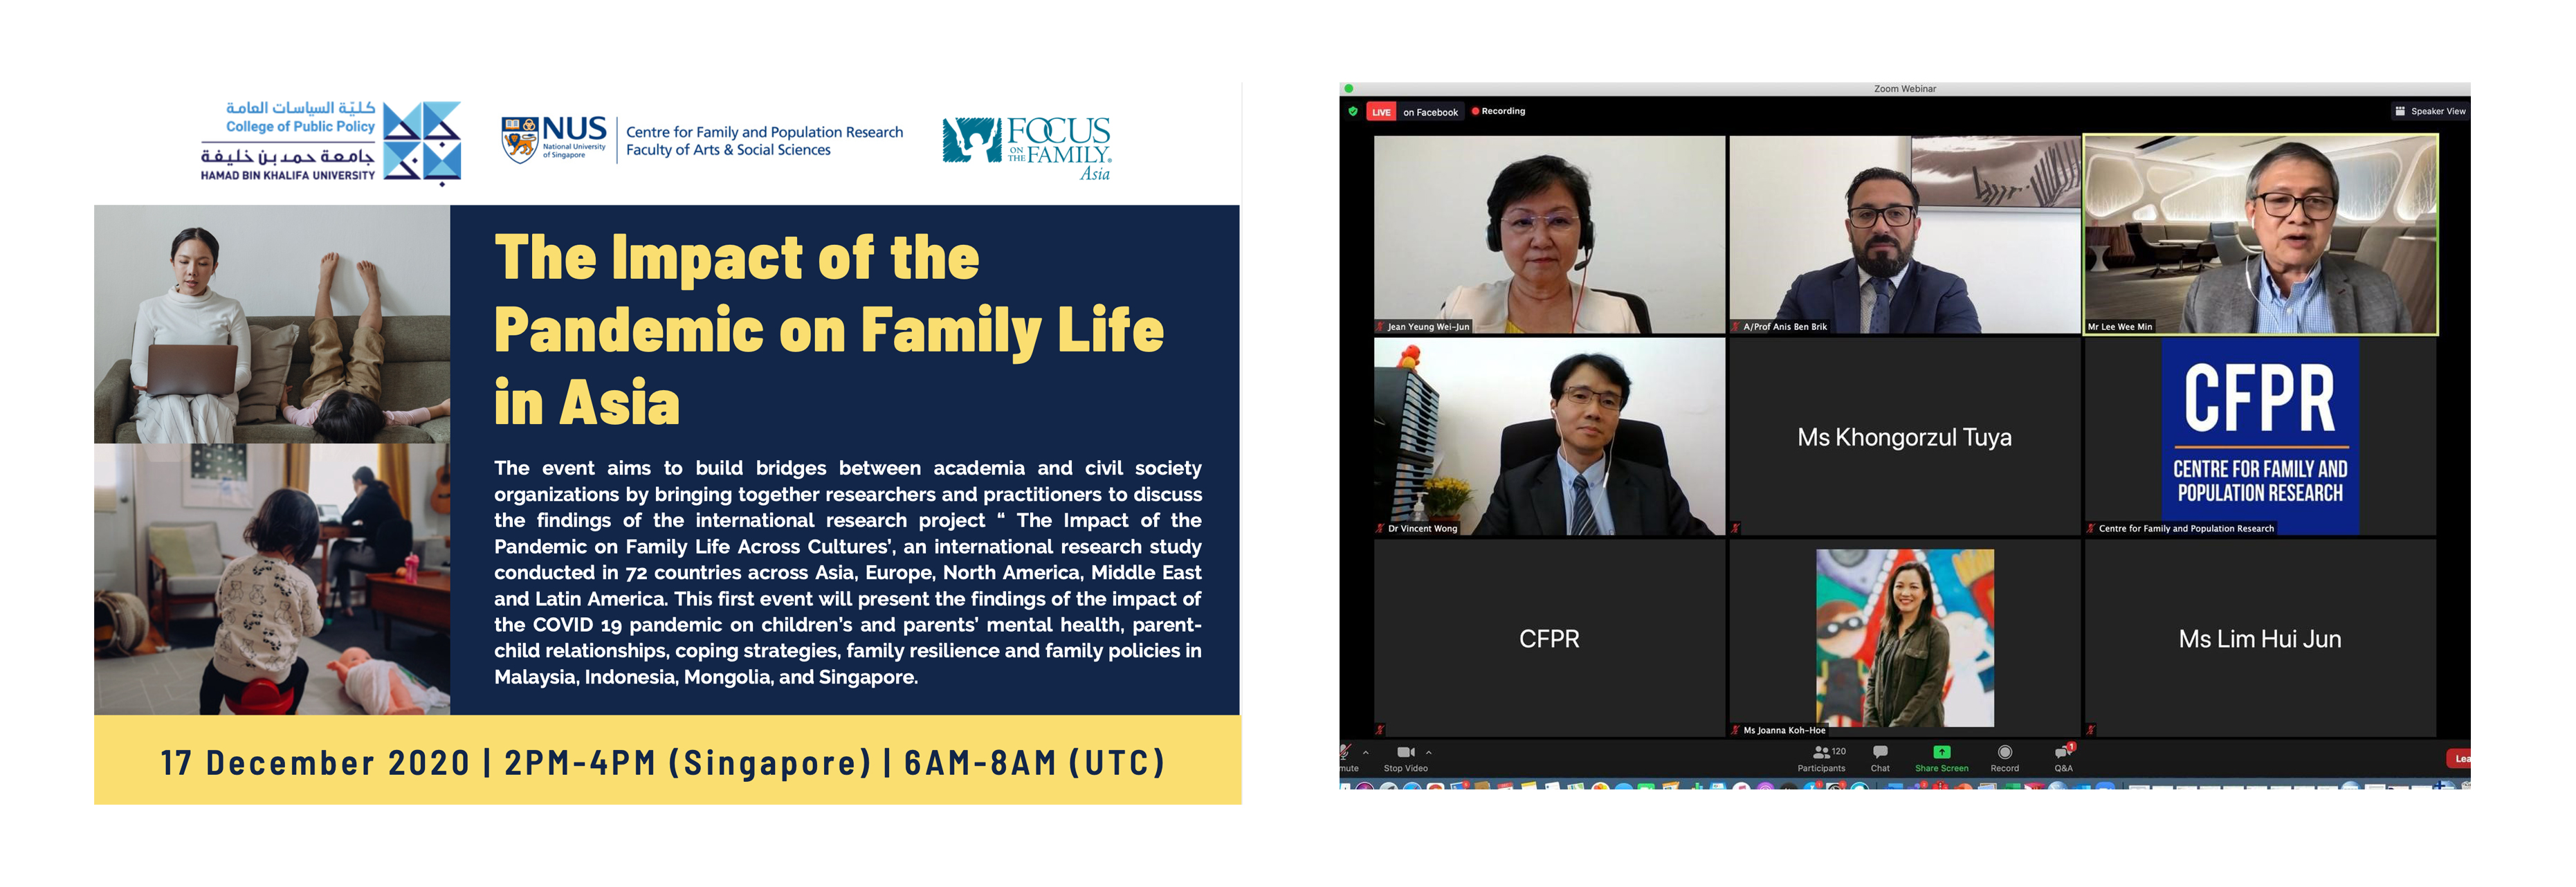 HBKU’s College of Public Policy Holds Webinar Series on COVID-19 Family Life Study 